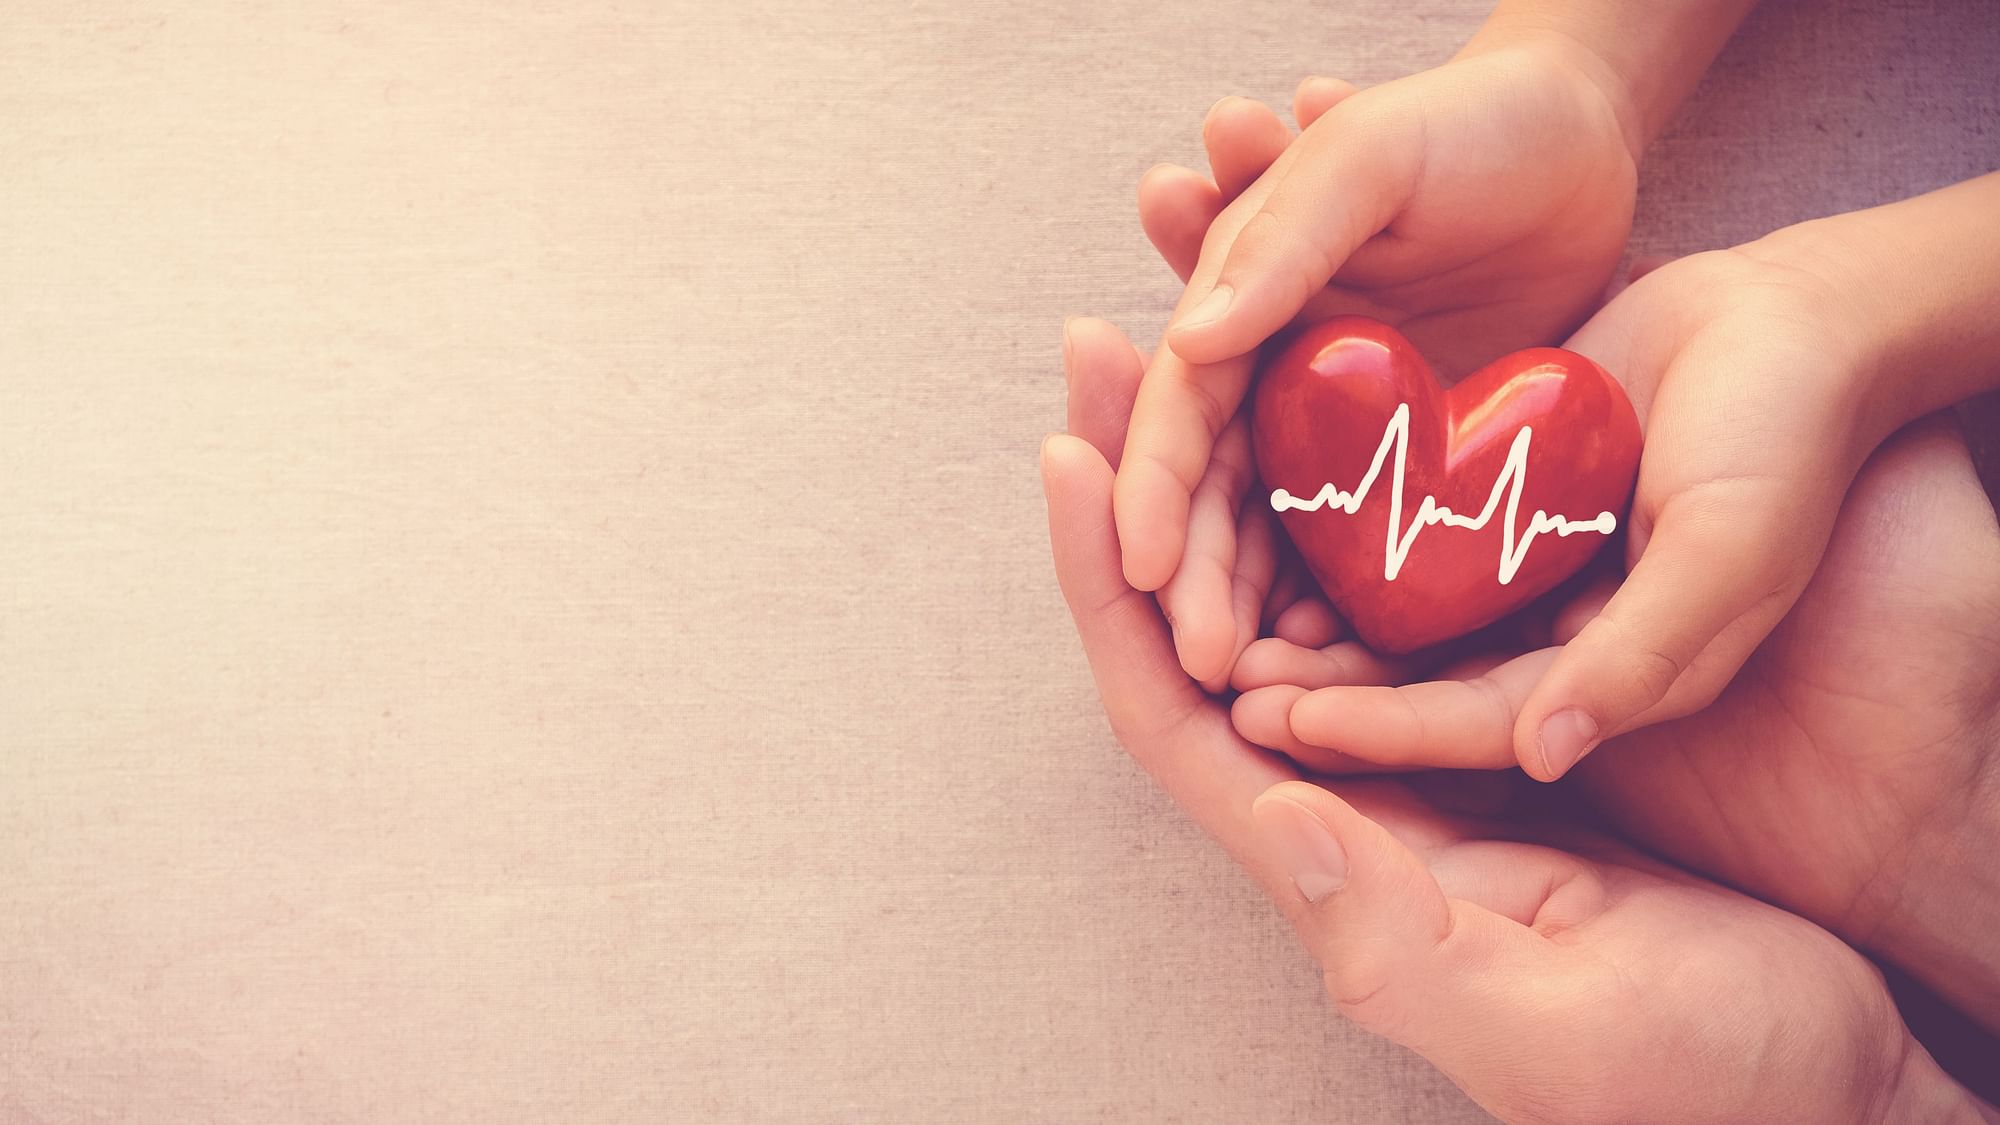 These simple changes could help you with a healthy heart.